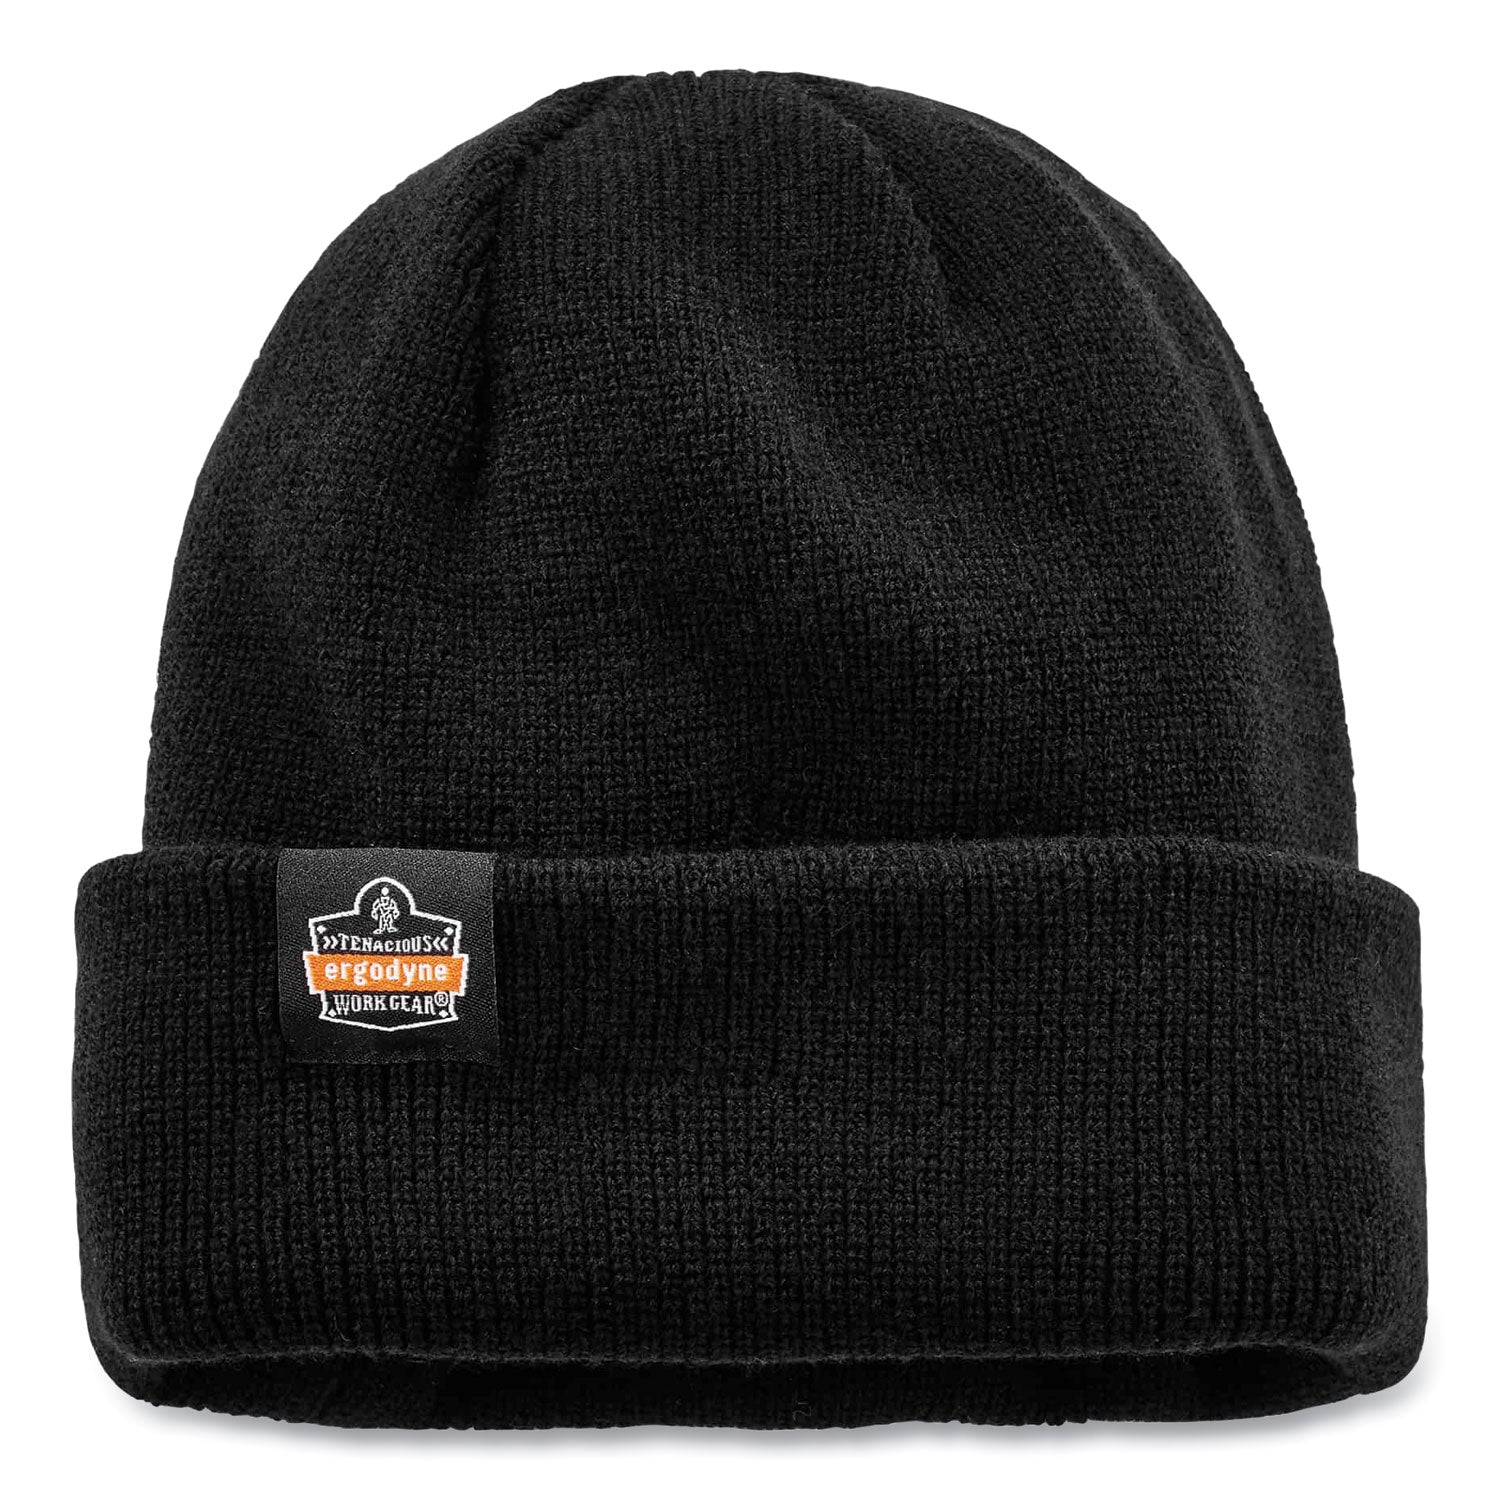 n-ferno-6811z-rib-knit-hat-with-zipper-for-bump-cap-insert-one-size-fits-most-black-ships-in-1-3-business-days_ego16801 - 1